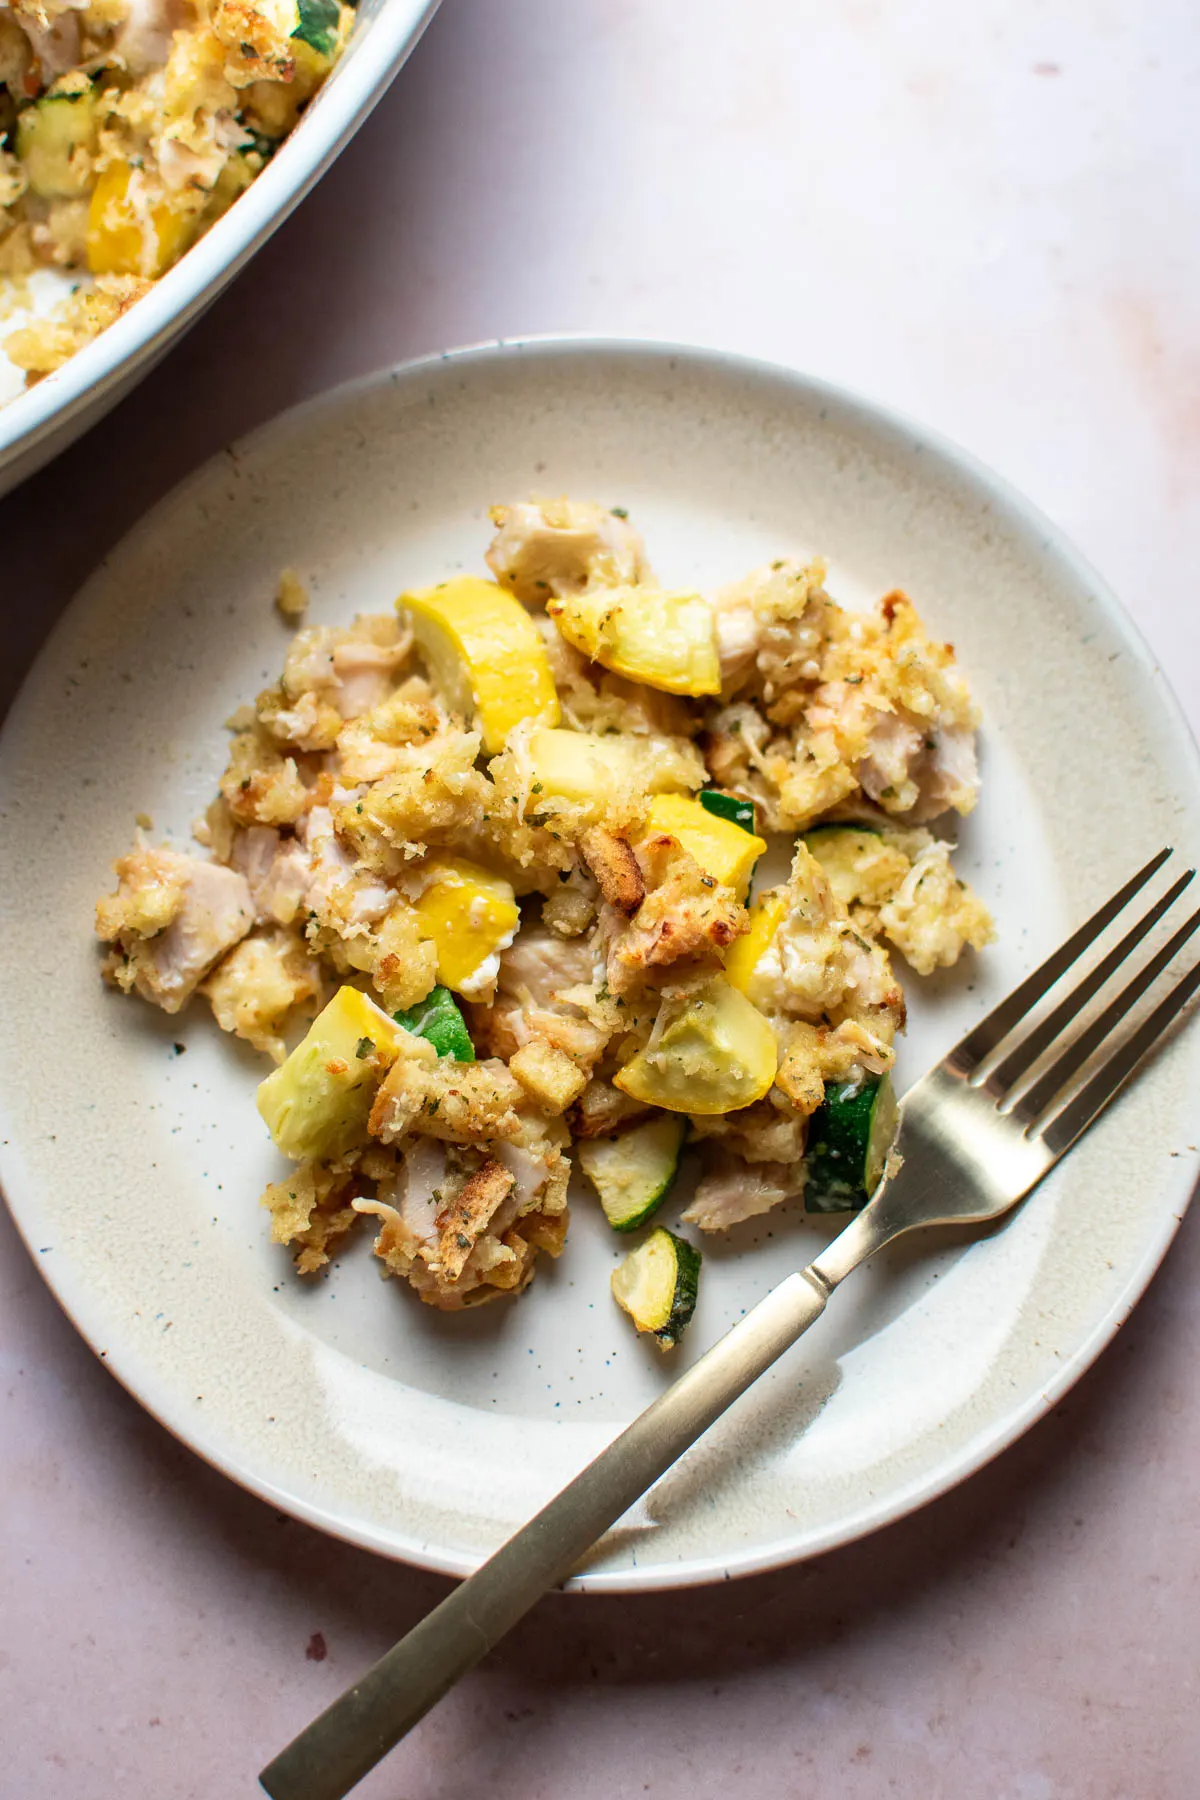 Chicken zucchini casserole and gold fork resting on beige plate.